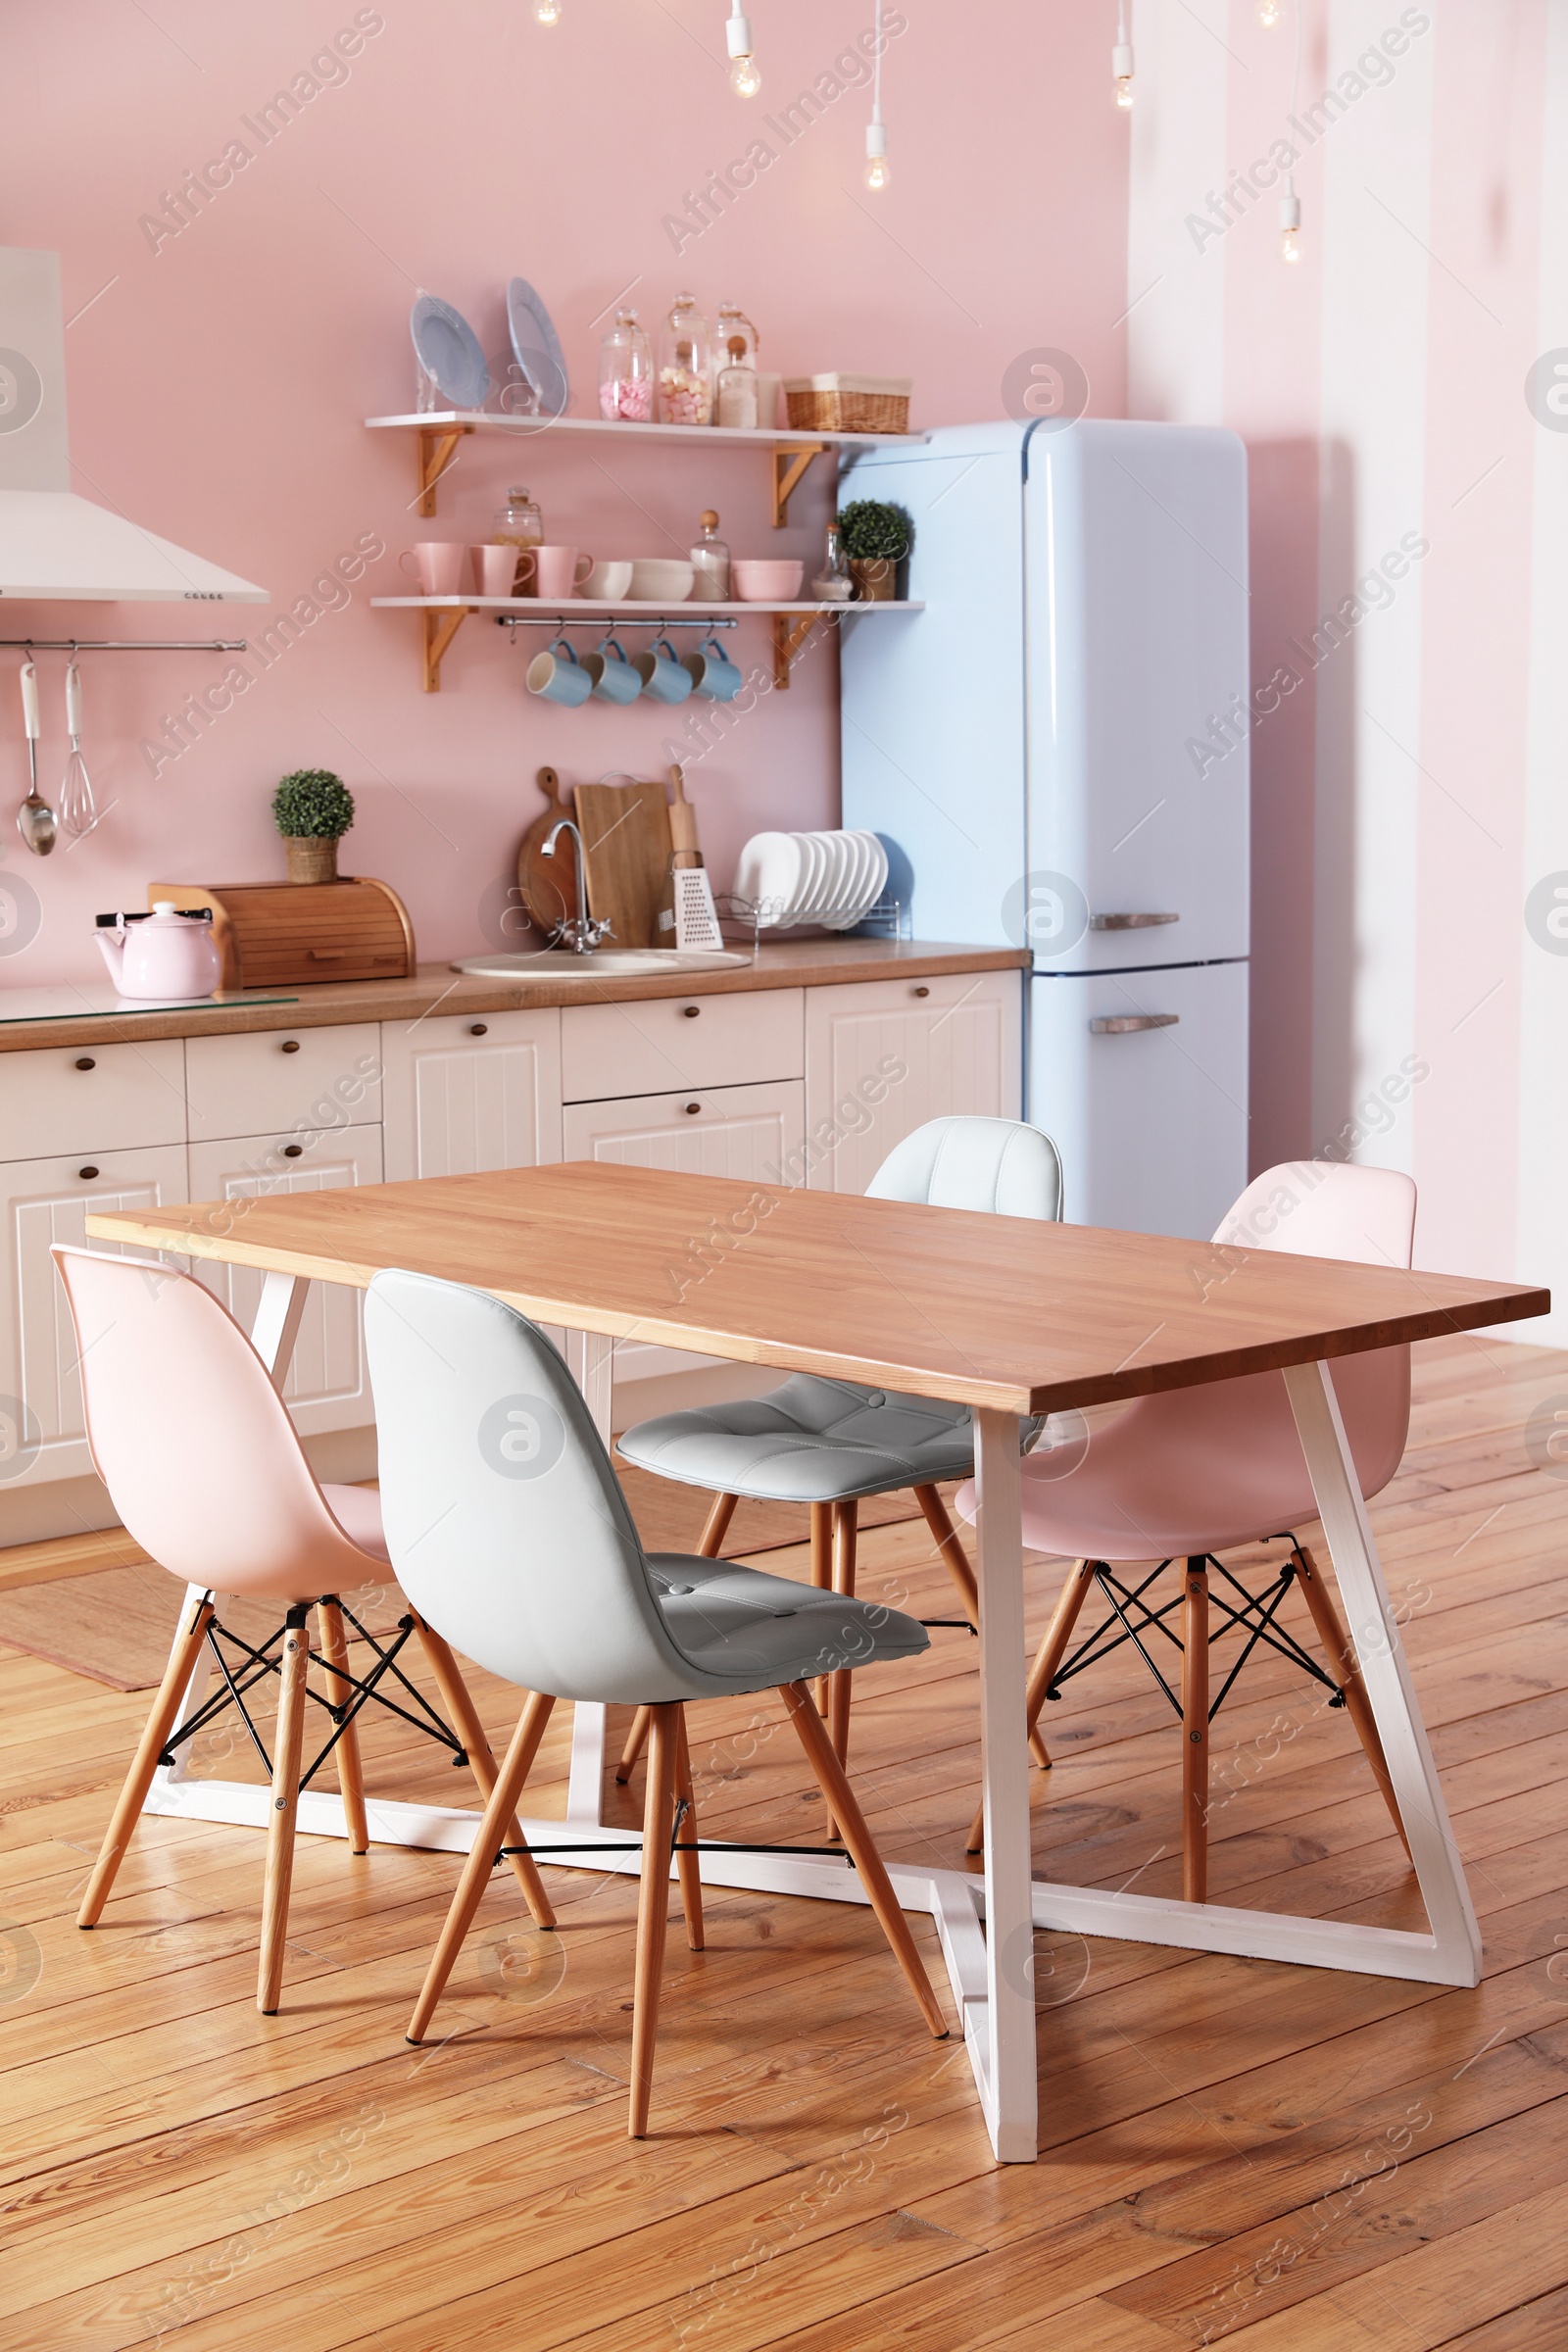 Photo of Stylish pink kitchen interior with dining table and chairs